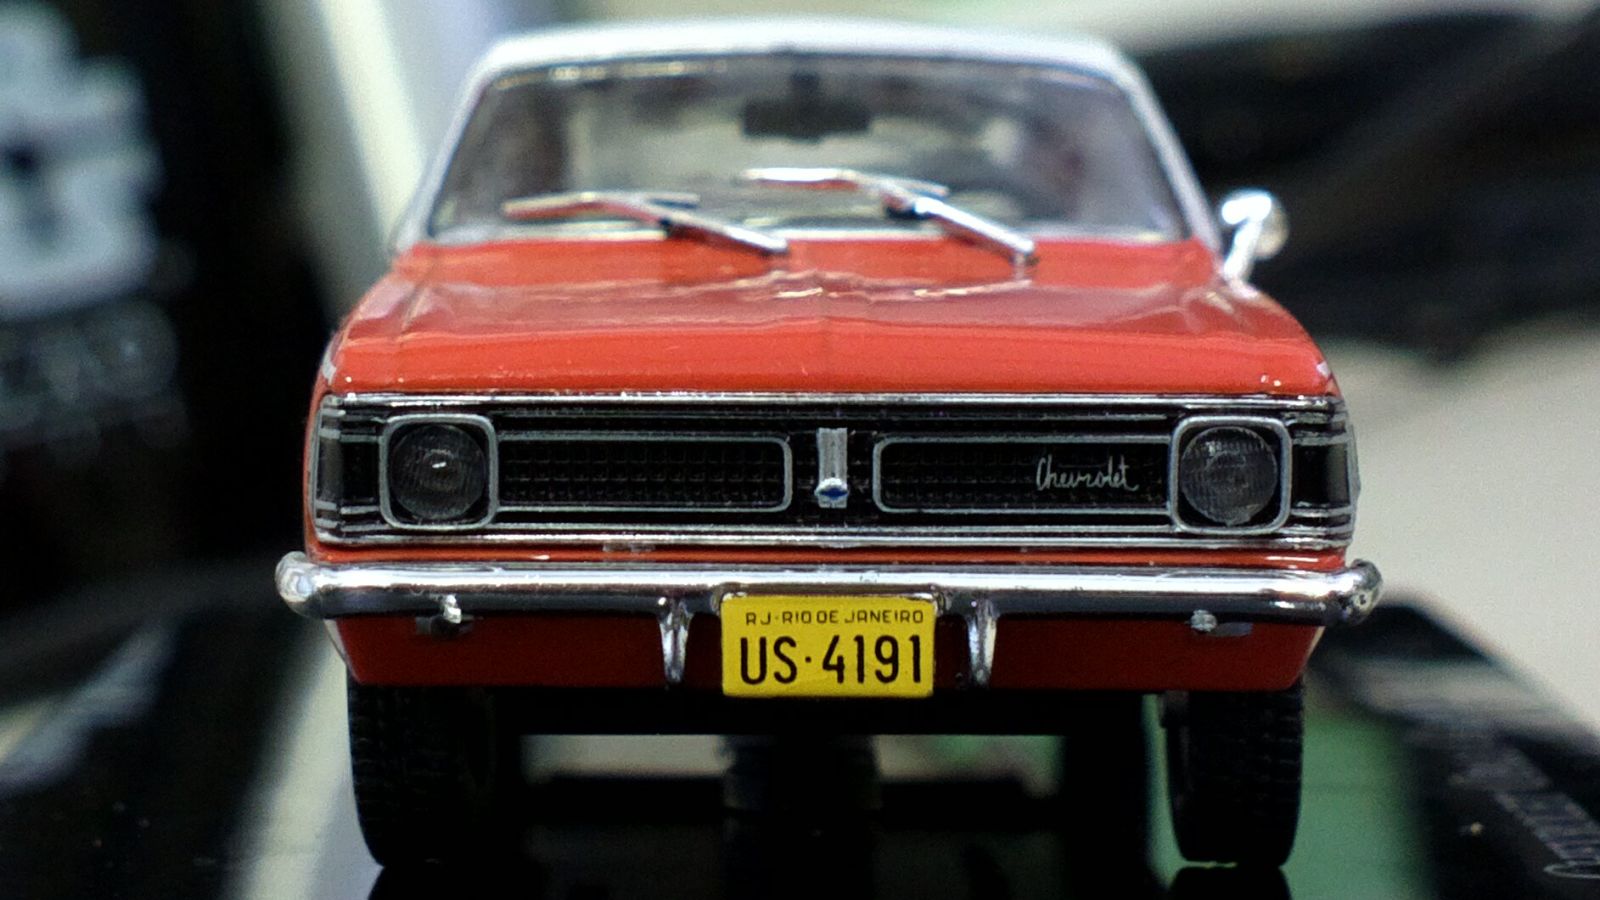 Illustration for article titled 1/43 HAWL - 1971 Chevrolet Opala Gran Luxo